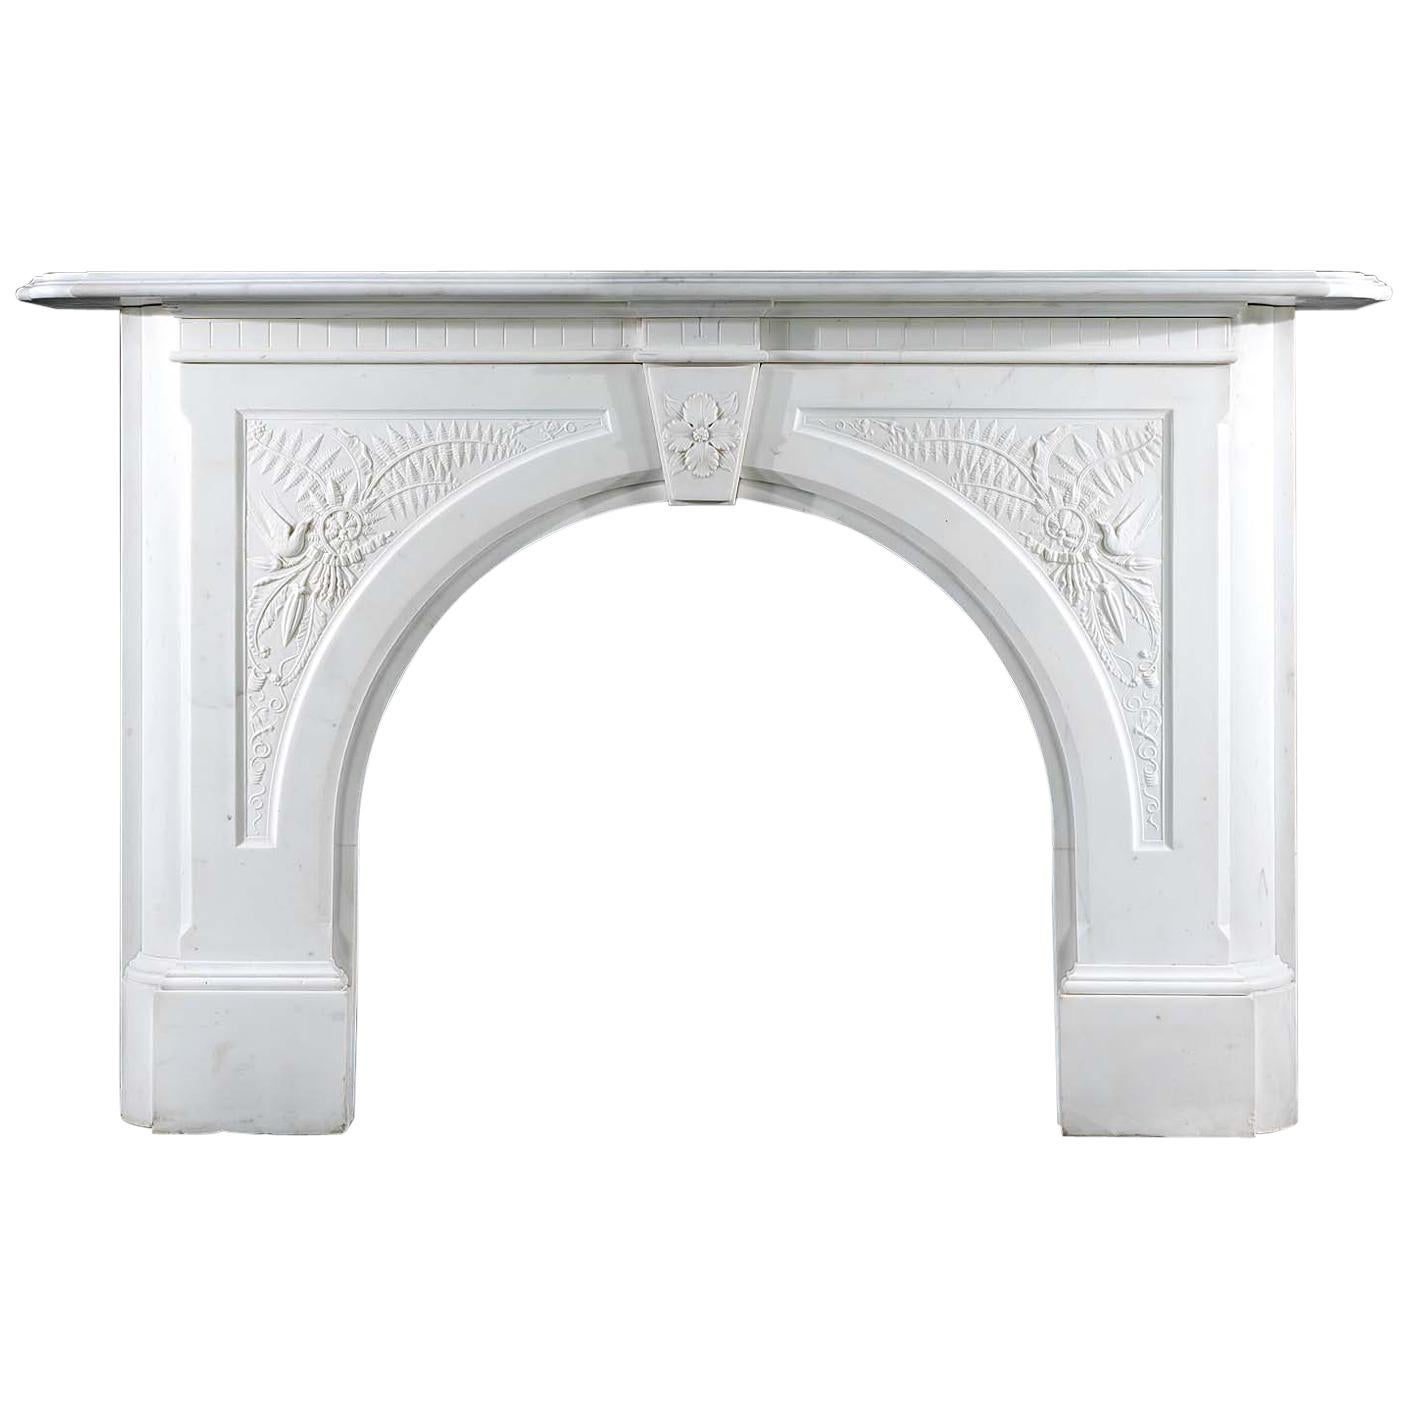 Large Arched Victorian Chimneypiece in White Statuary Marble